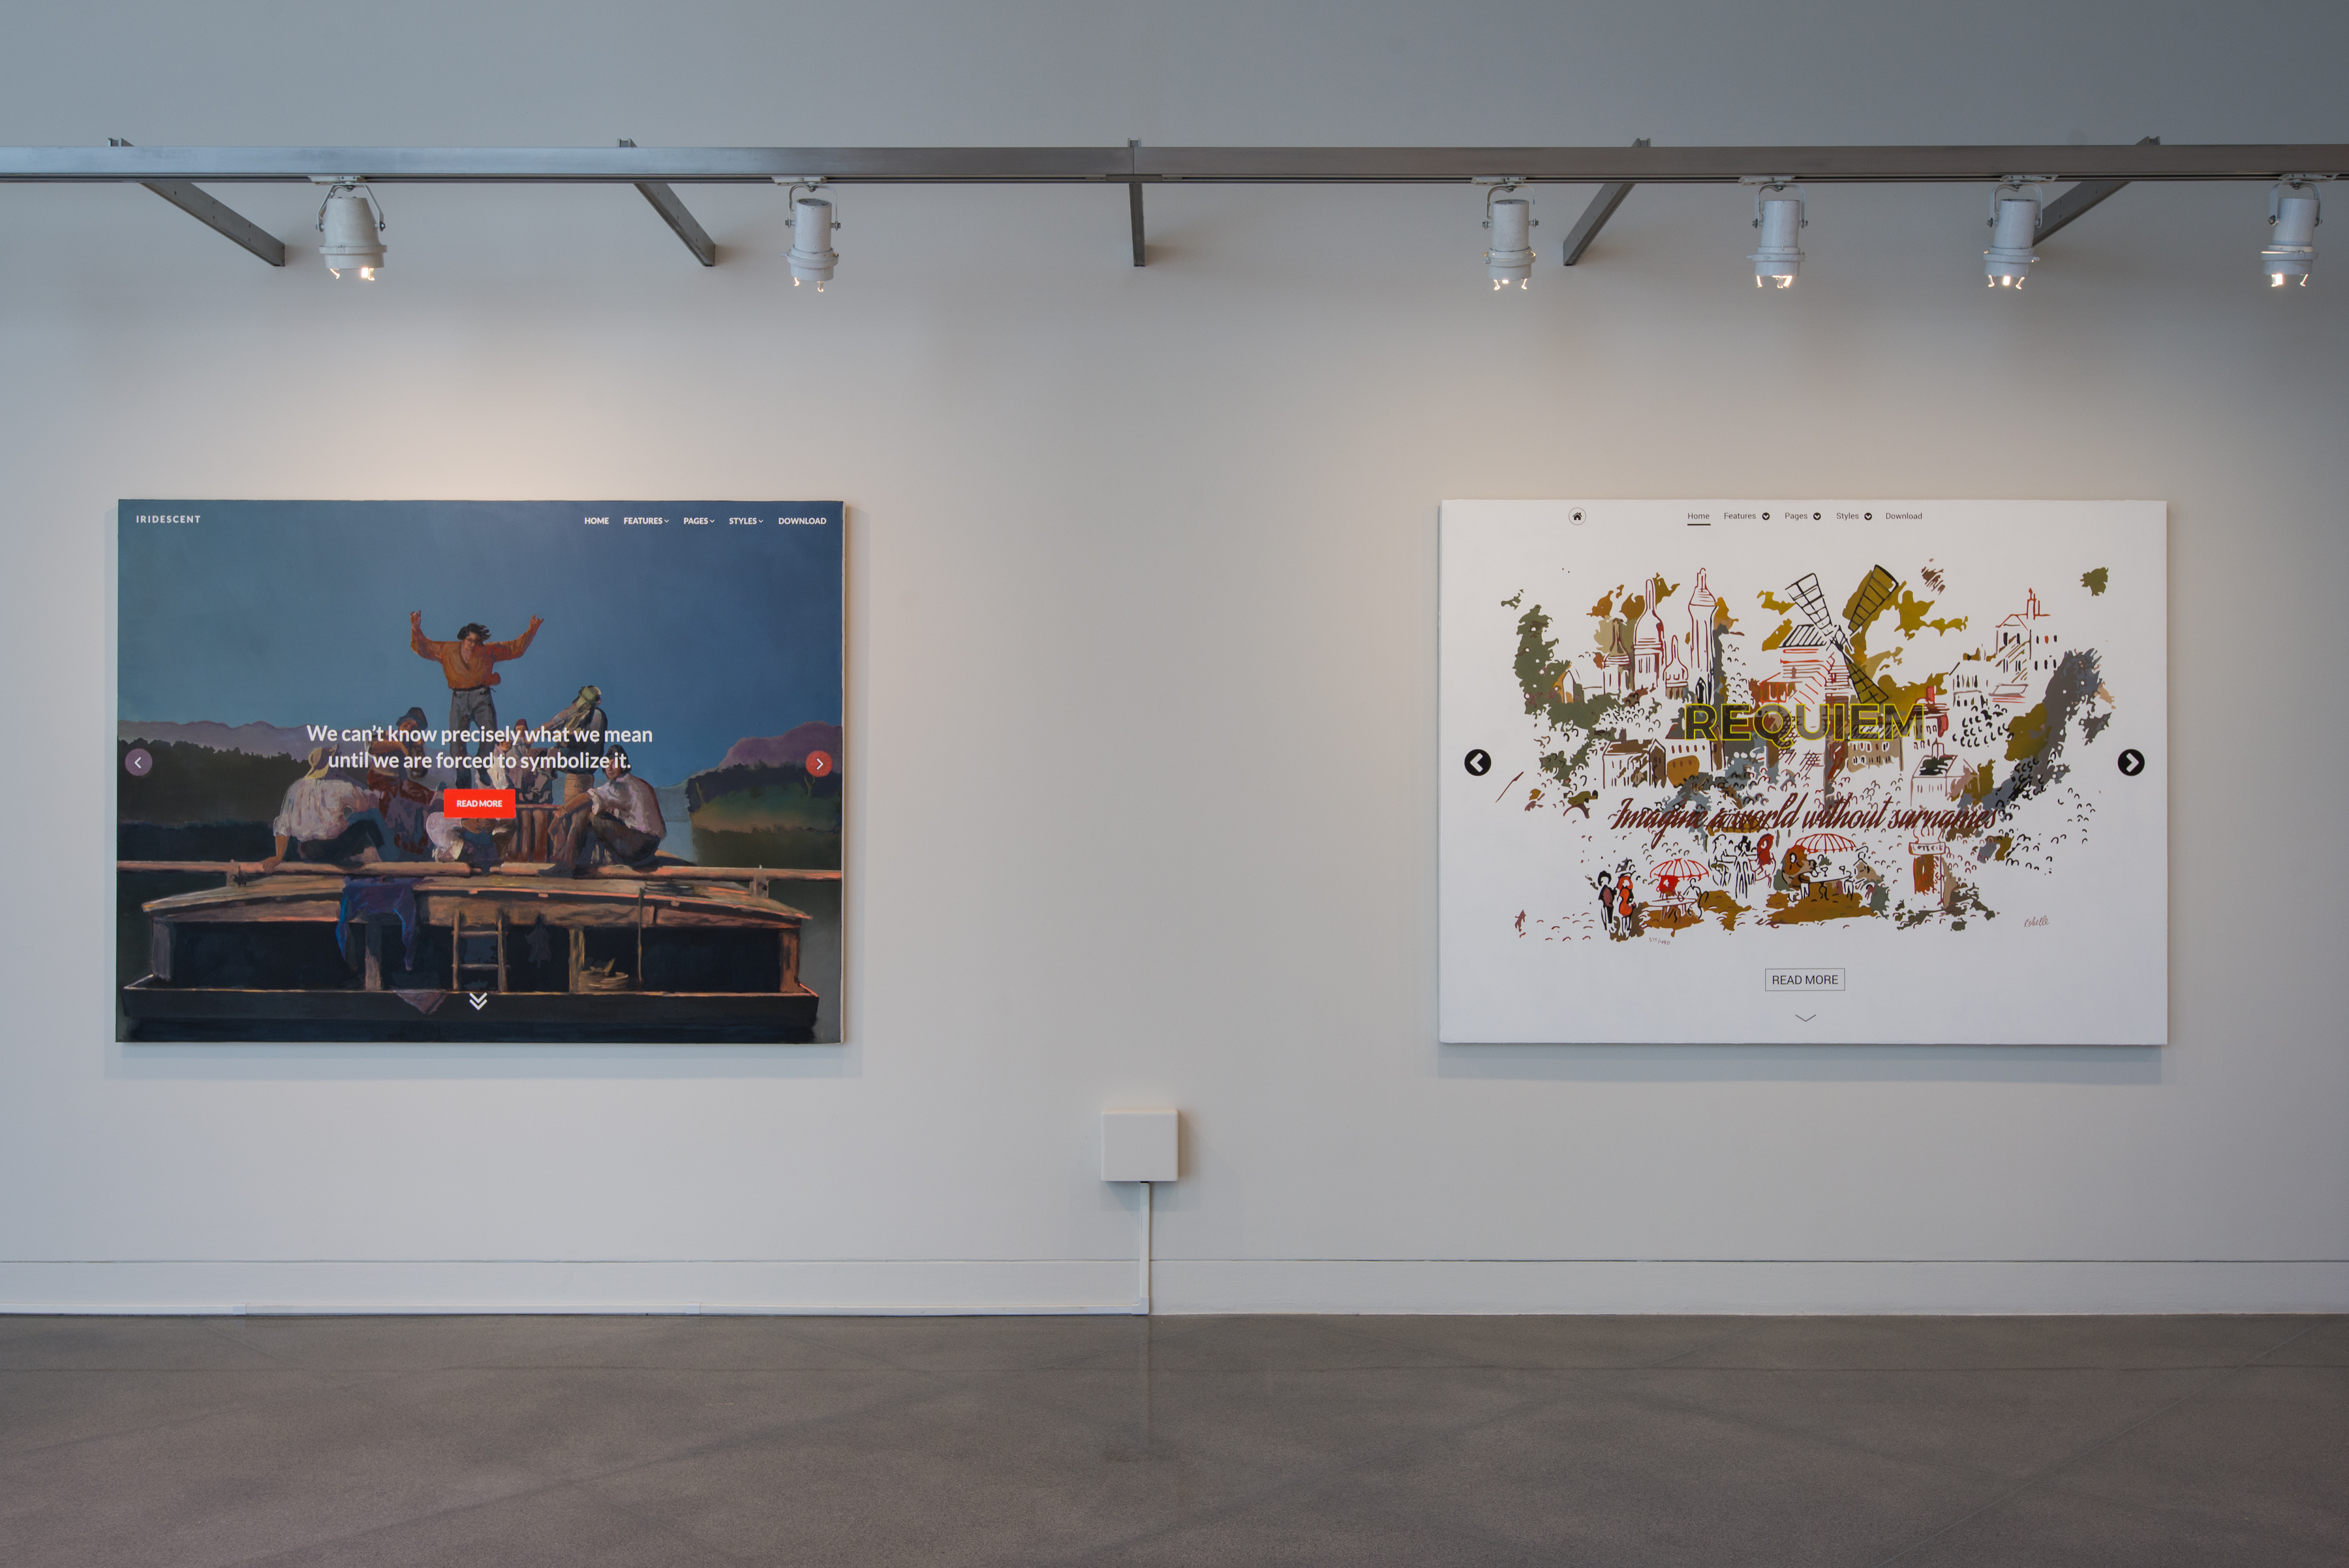 Office Space, installation view of Joel Holmberg, The Big Text Field in the Sky, 2015 and Requiem, 2015  
Courtesy the artist 
Commissioned by Yerba Buena Center for the Arts
Photo: Charlie Villyard
